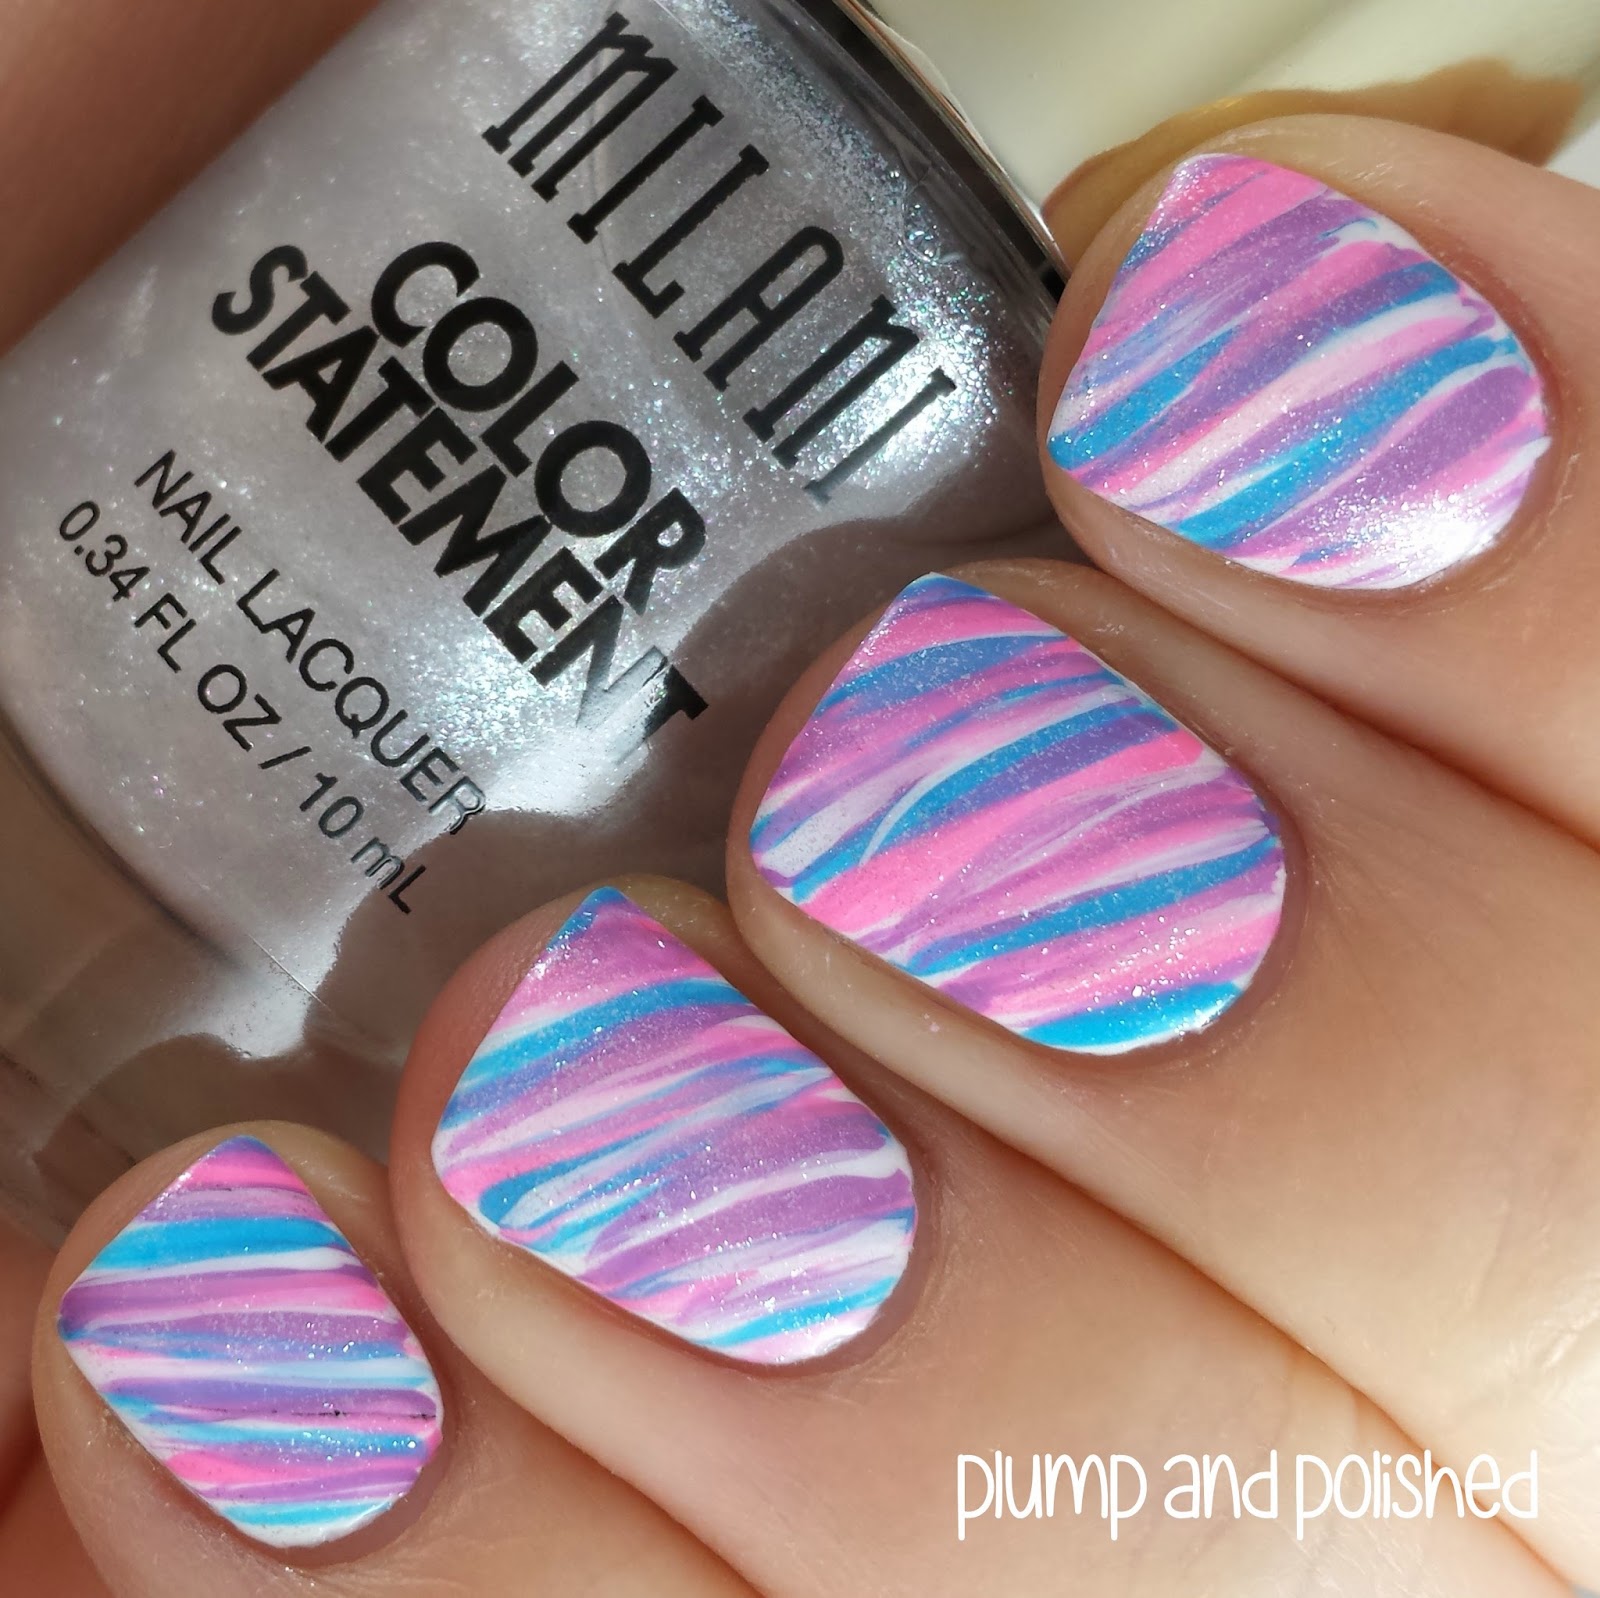 Plump and Polished: Milani Color Statement - Cotton Candy Stripes Nail Art